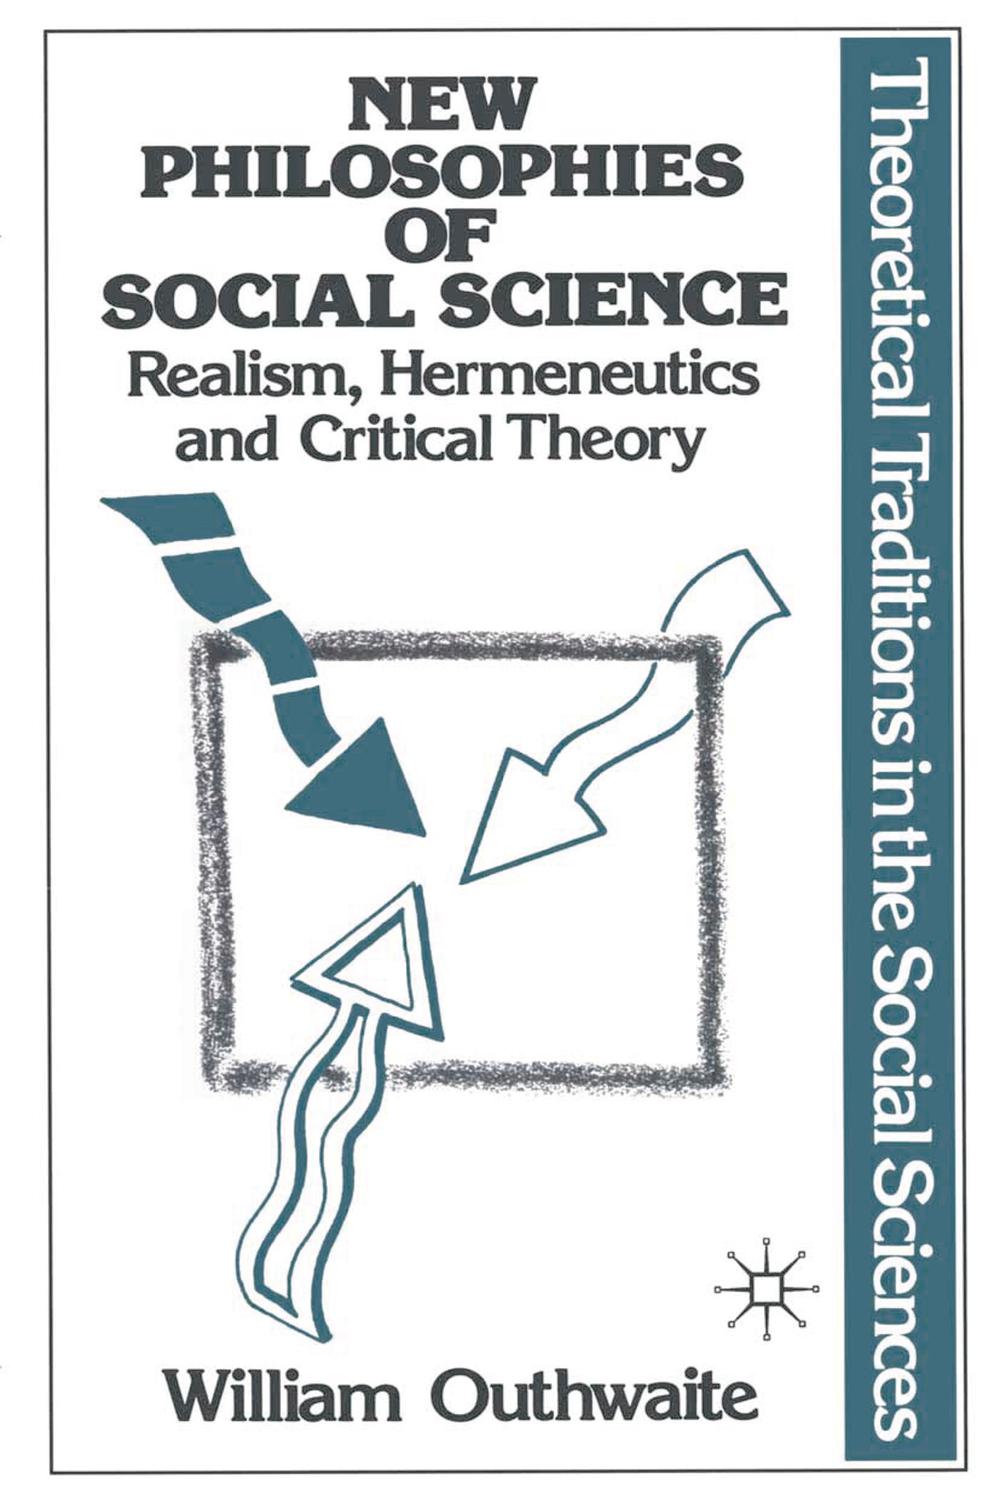 New Philosophies of Social Science: Realism, Hermeneutics and Critical Theory - William Outhwaite